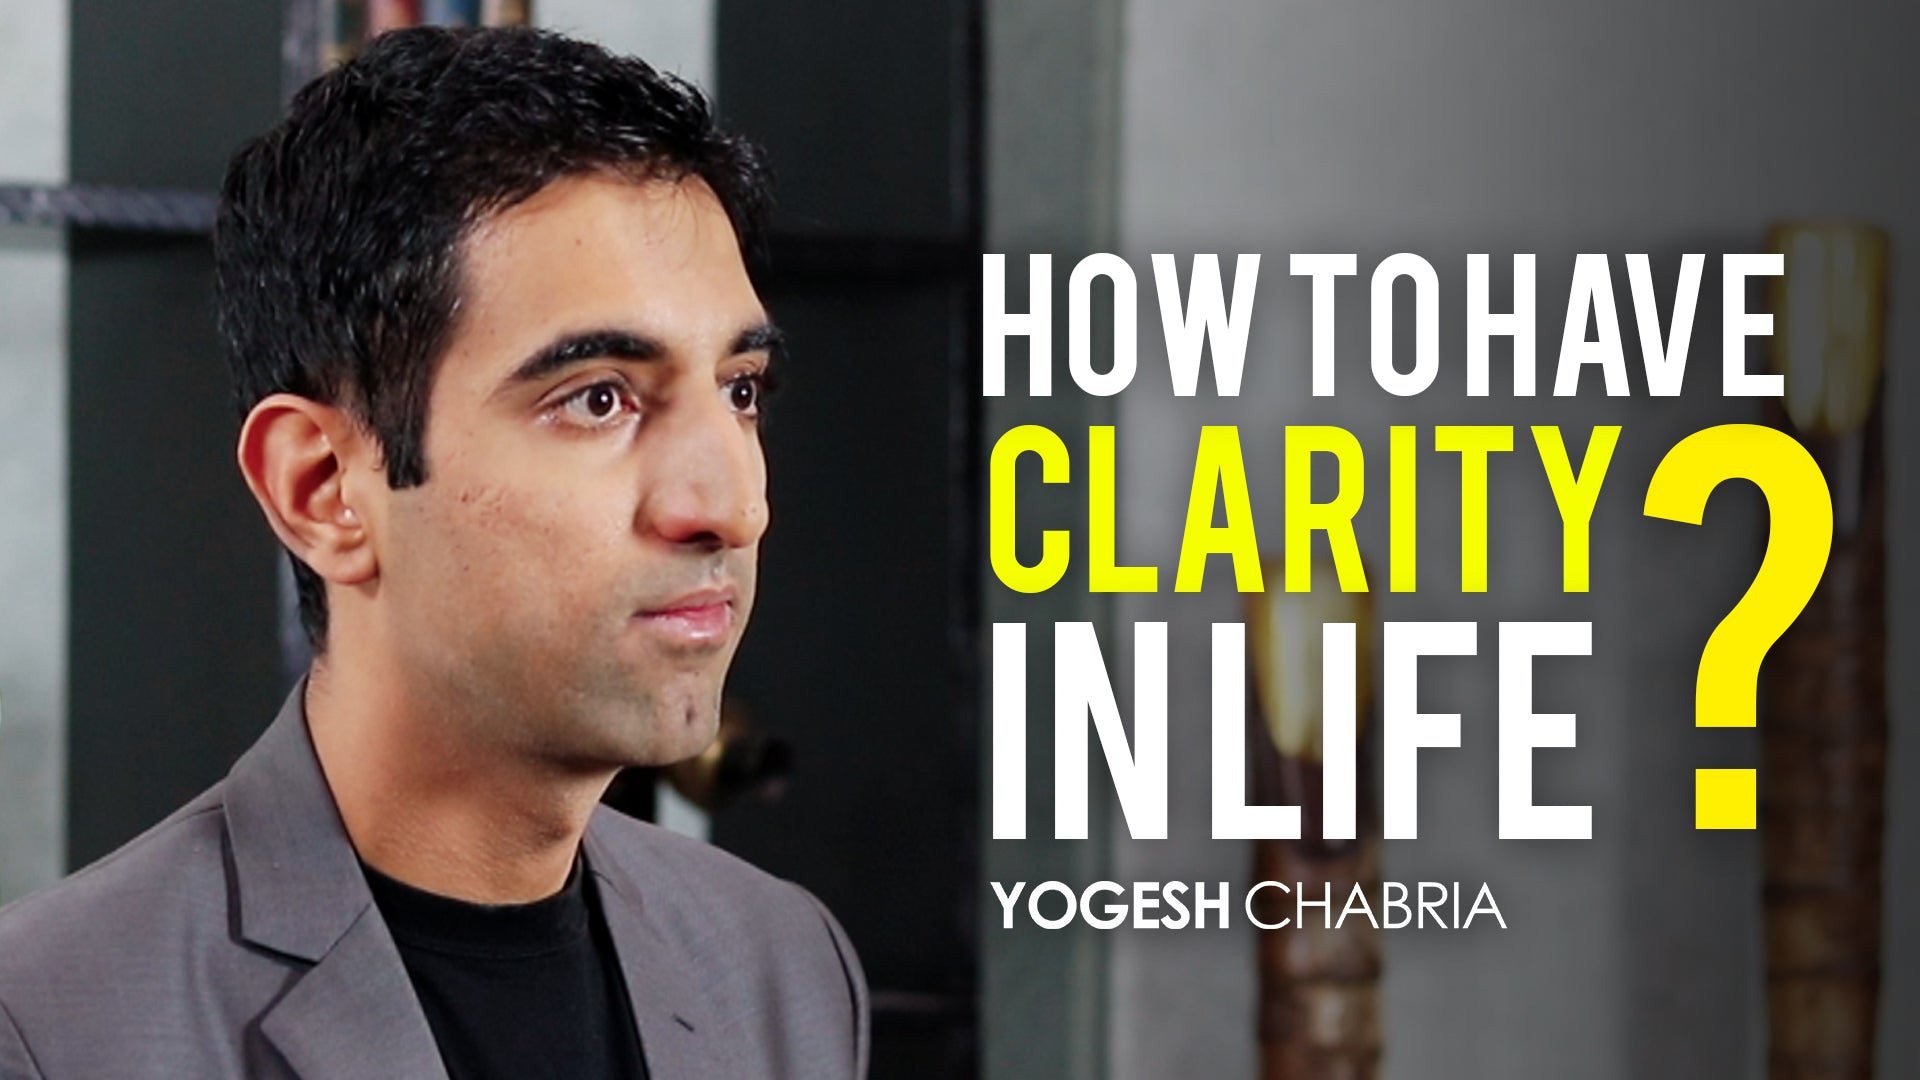 Yogesh Chabria - How to have clarity in life? (video)